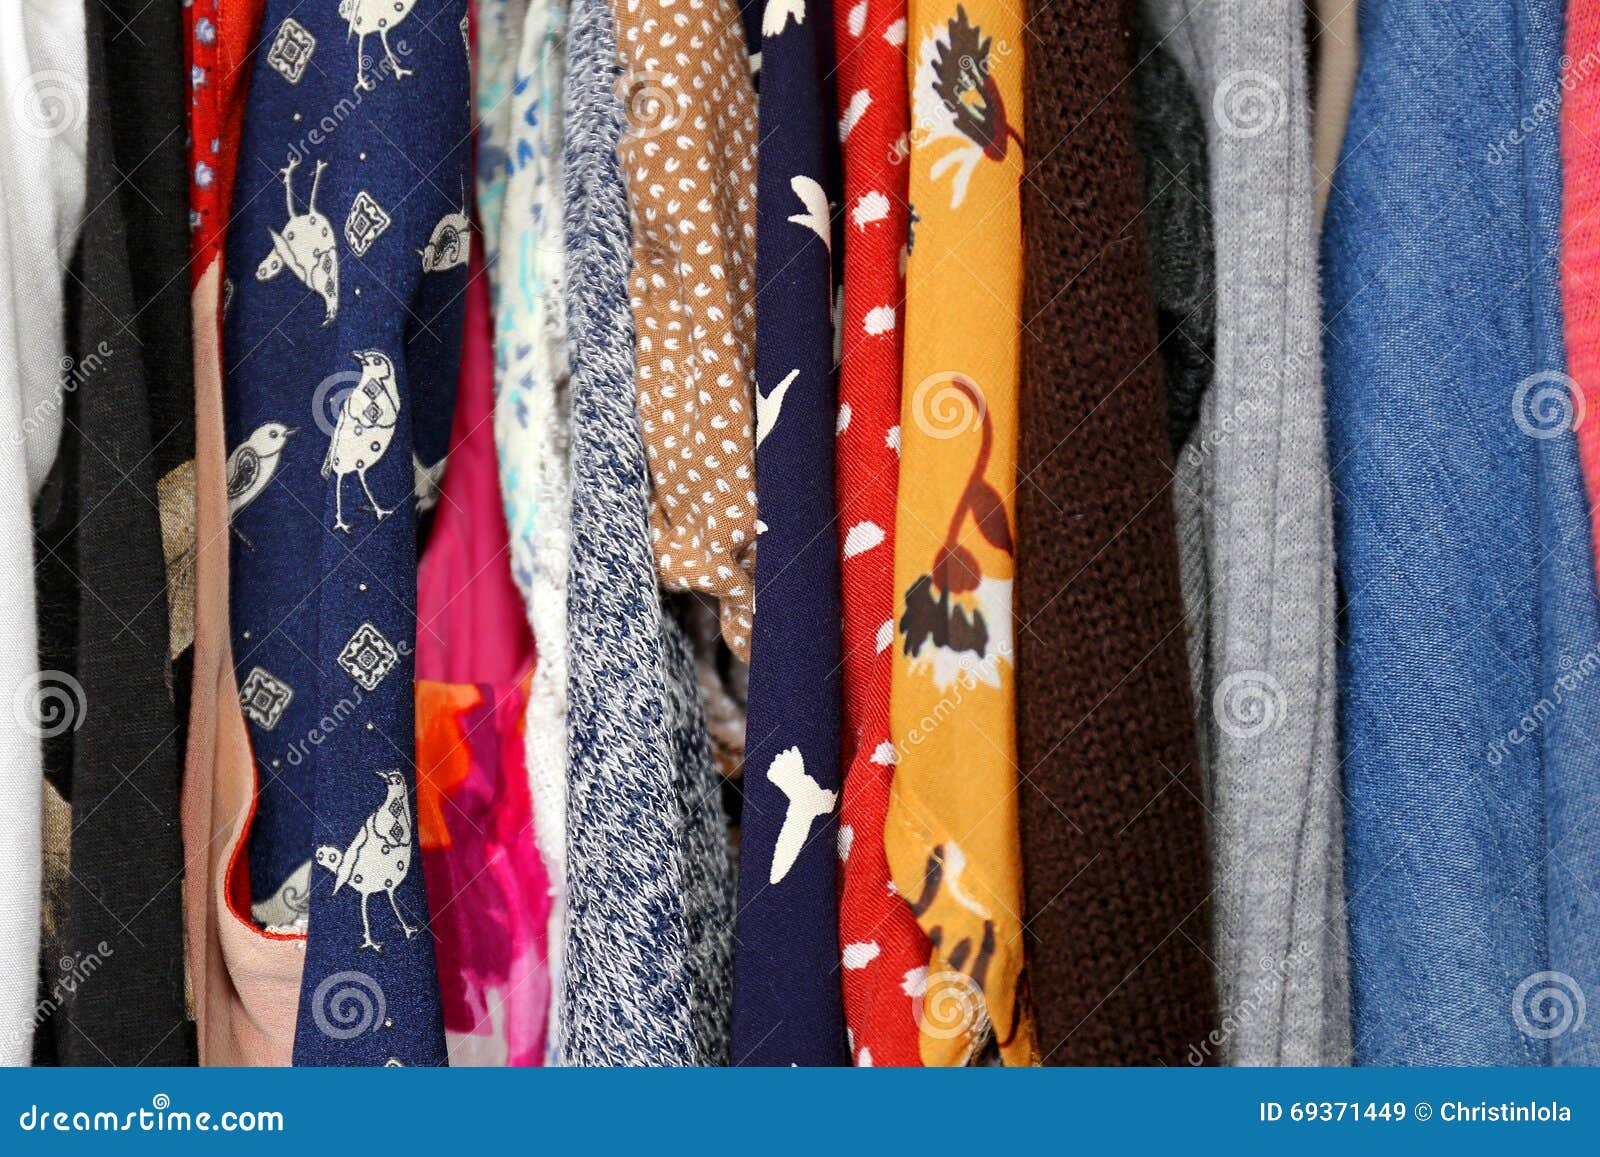 Colorful Woman S Clothing Fabric Hanging in Closet Stock Image - Image ...